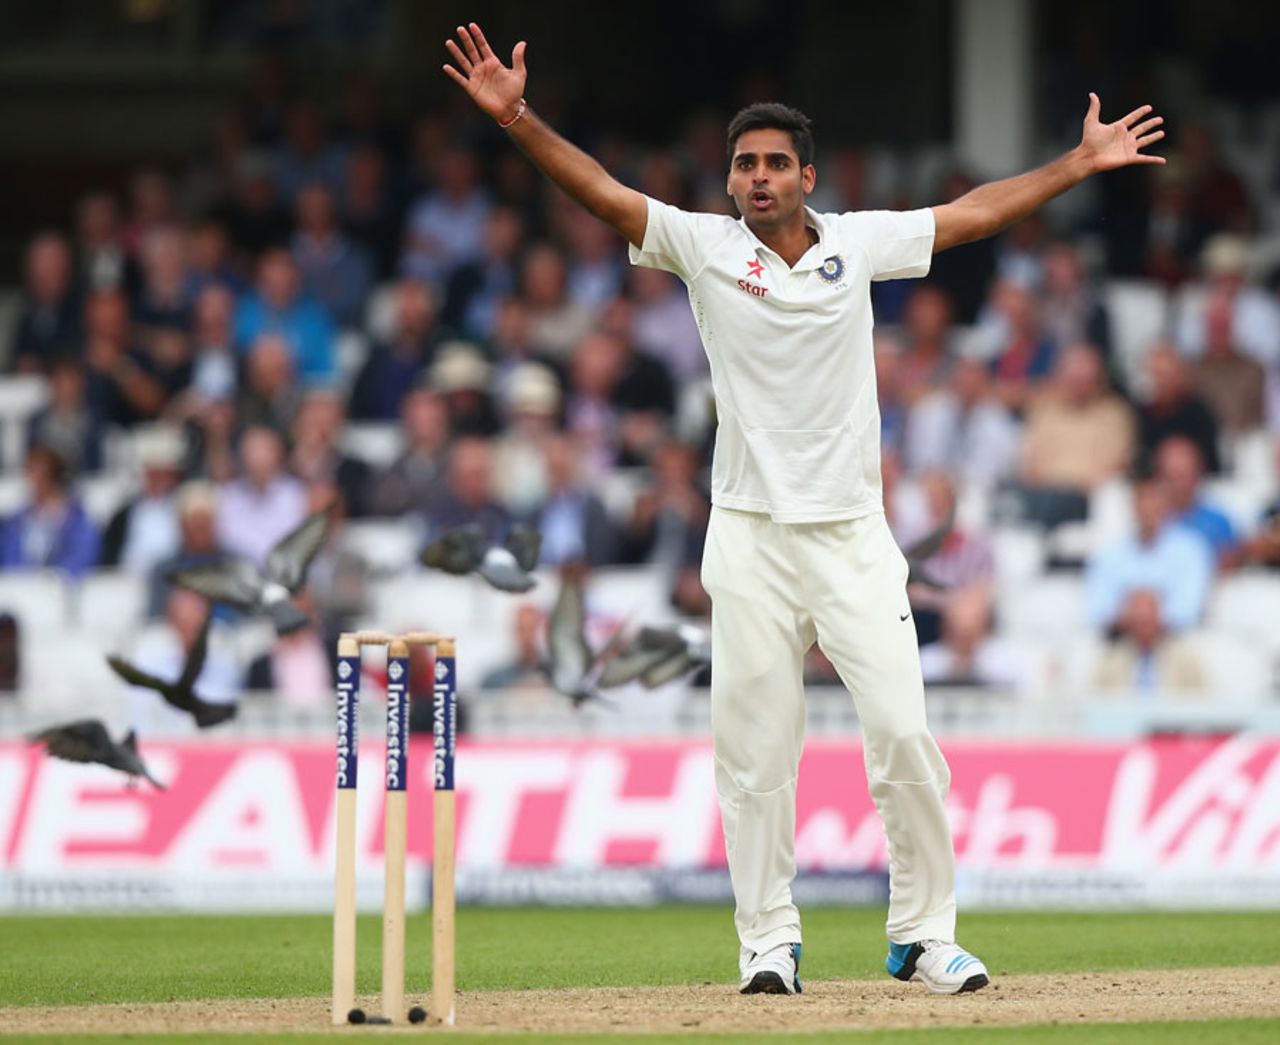 Bhuvneshwar Kumar had a good leg before appeal against Alastair Cook struck down, England v India, 5th Investec Test, The Oval, 1st day, August 15, 2014